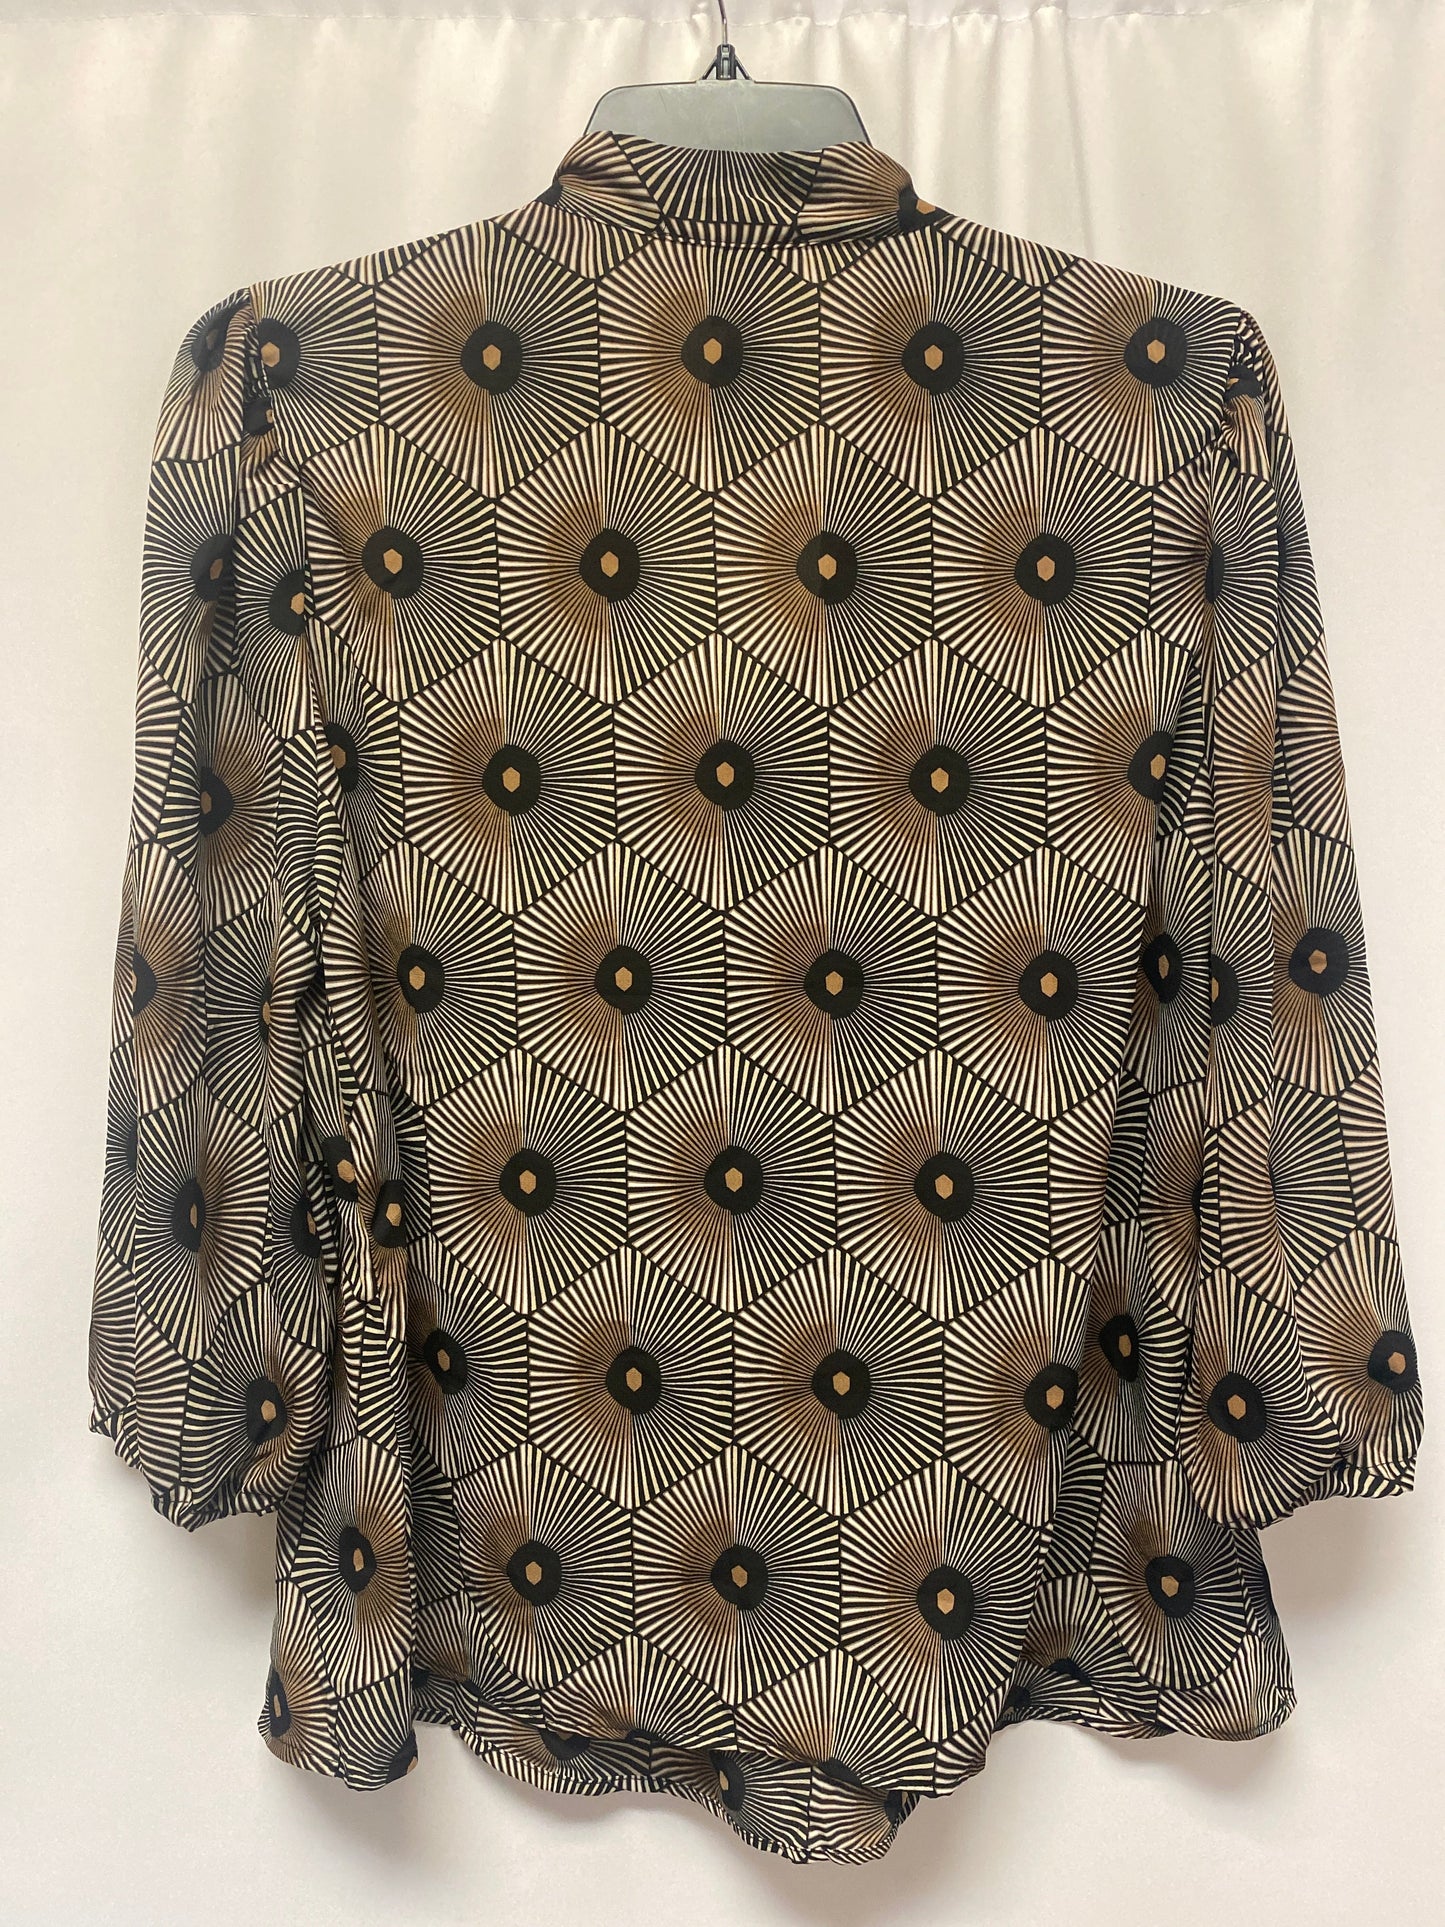 Brown Top 3/4 Sleeve By Design, Size 2x